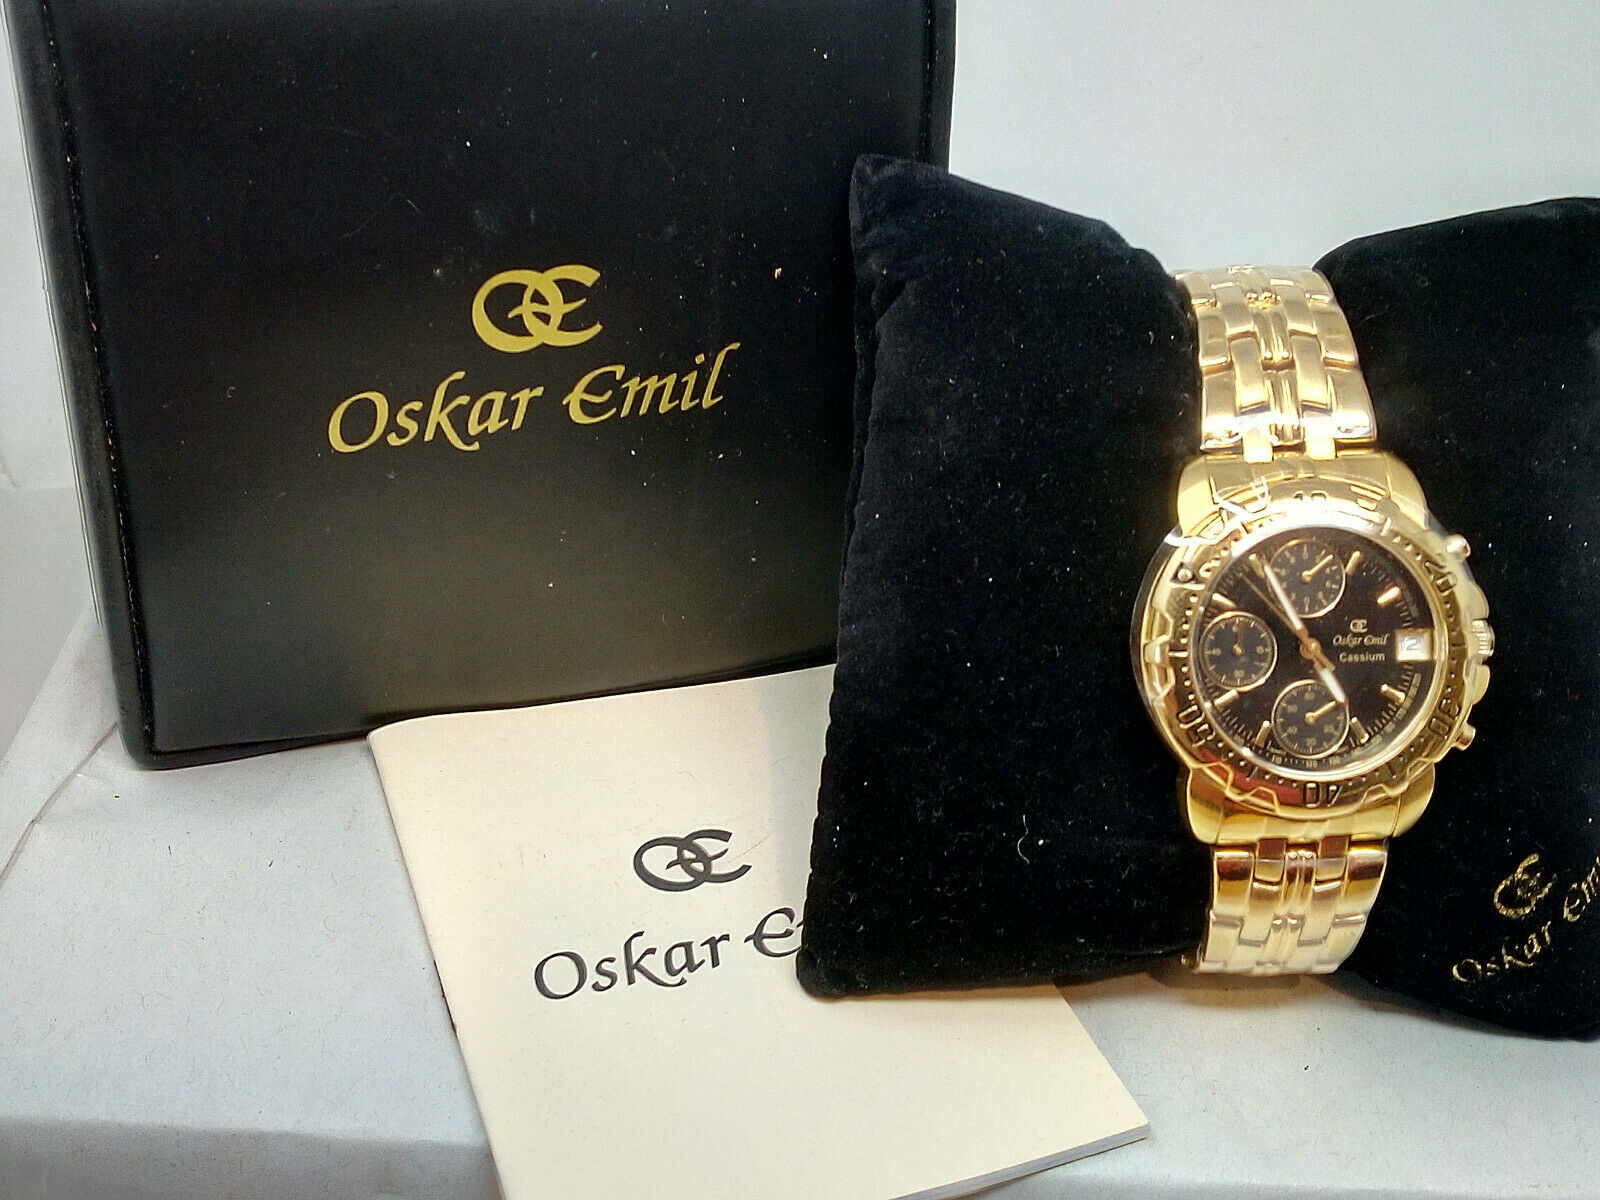 WRIST WATCH, gold-plated steel, Oscar Emil, chronograph. Clocks & Watches -  Wristwatches - Auctionet